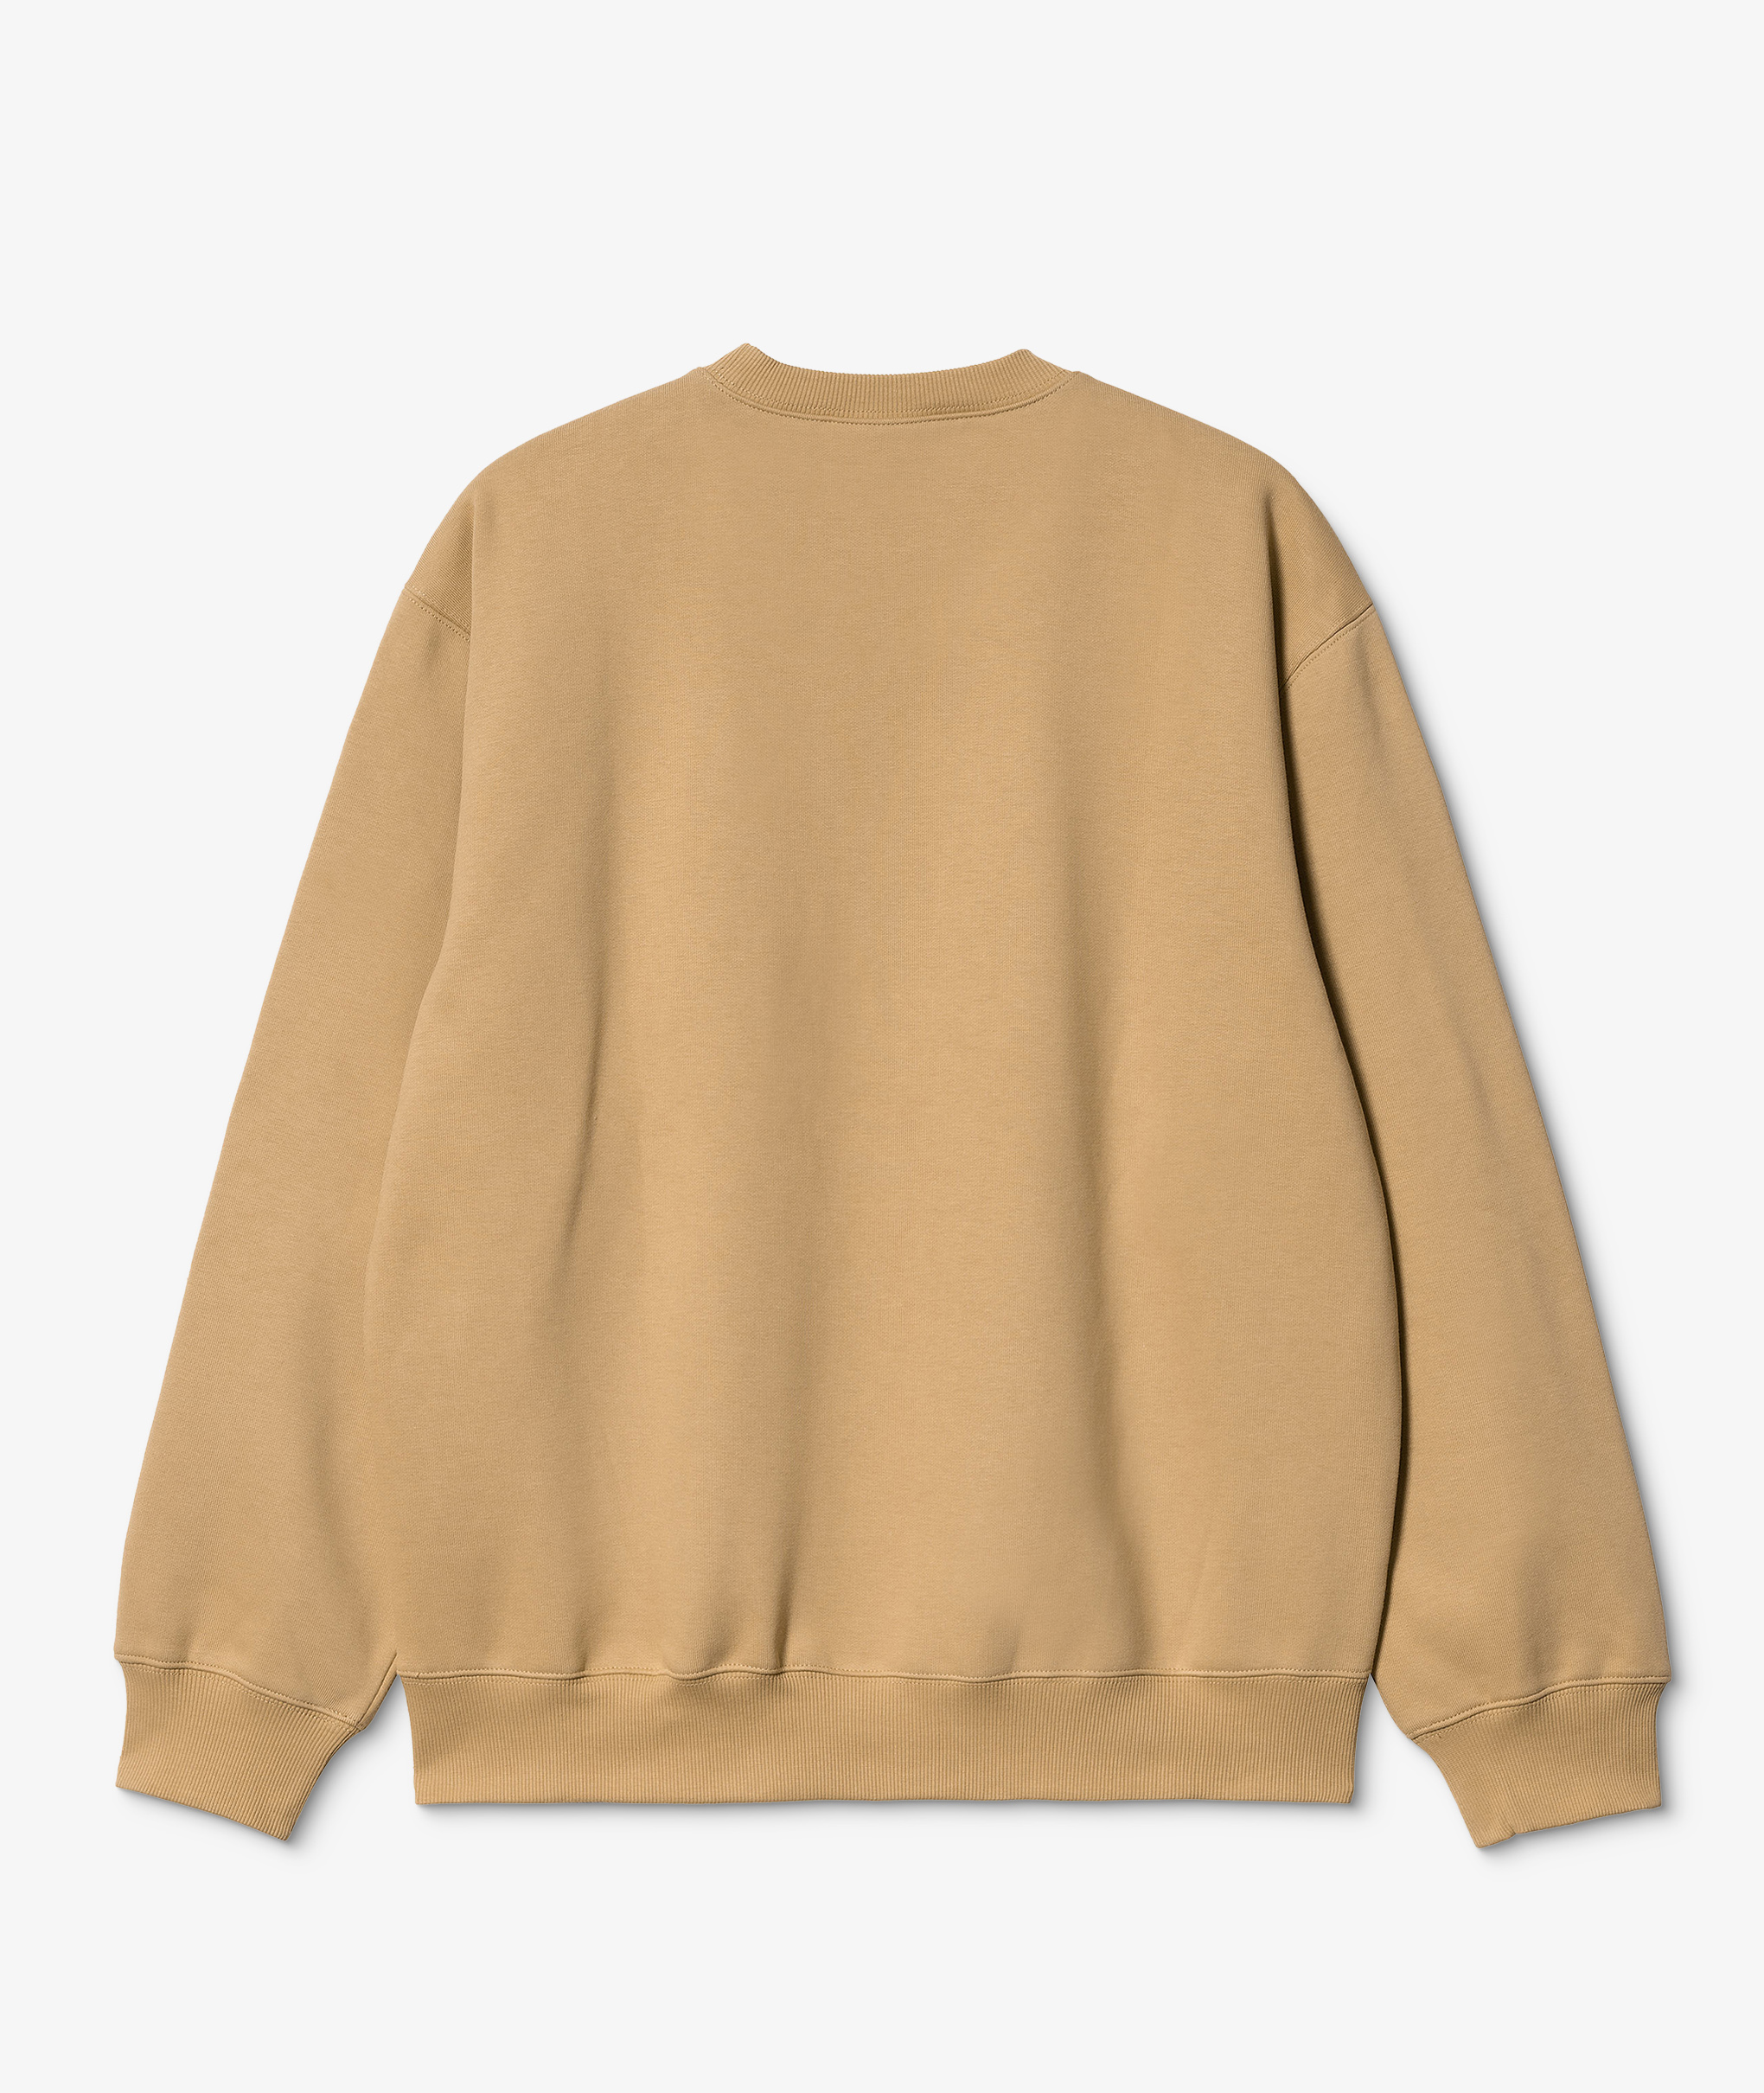 Norse Store  Shipping Worldwide - Carhartt WIP Lucky Painter Sweat - Dusty  H Brown